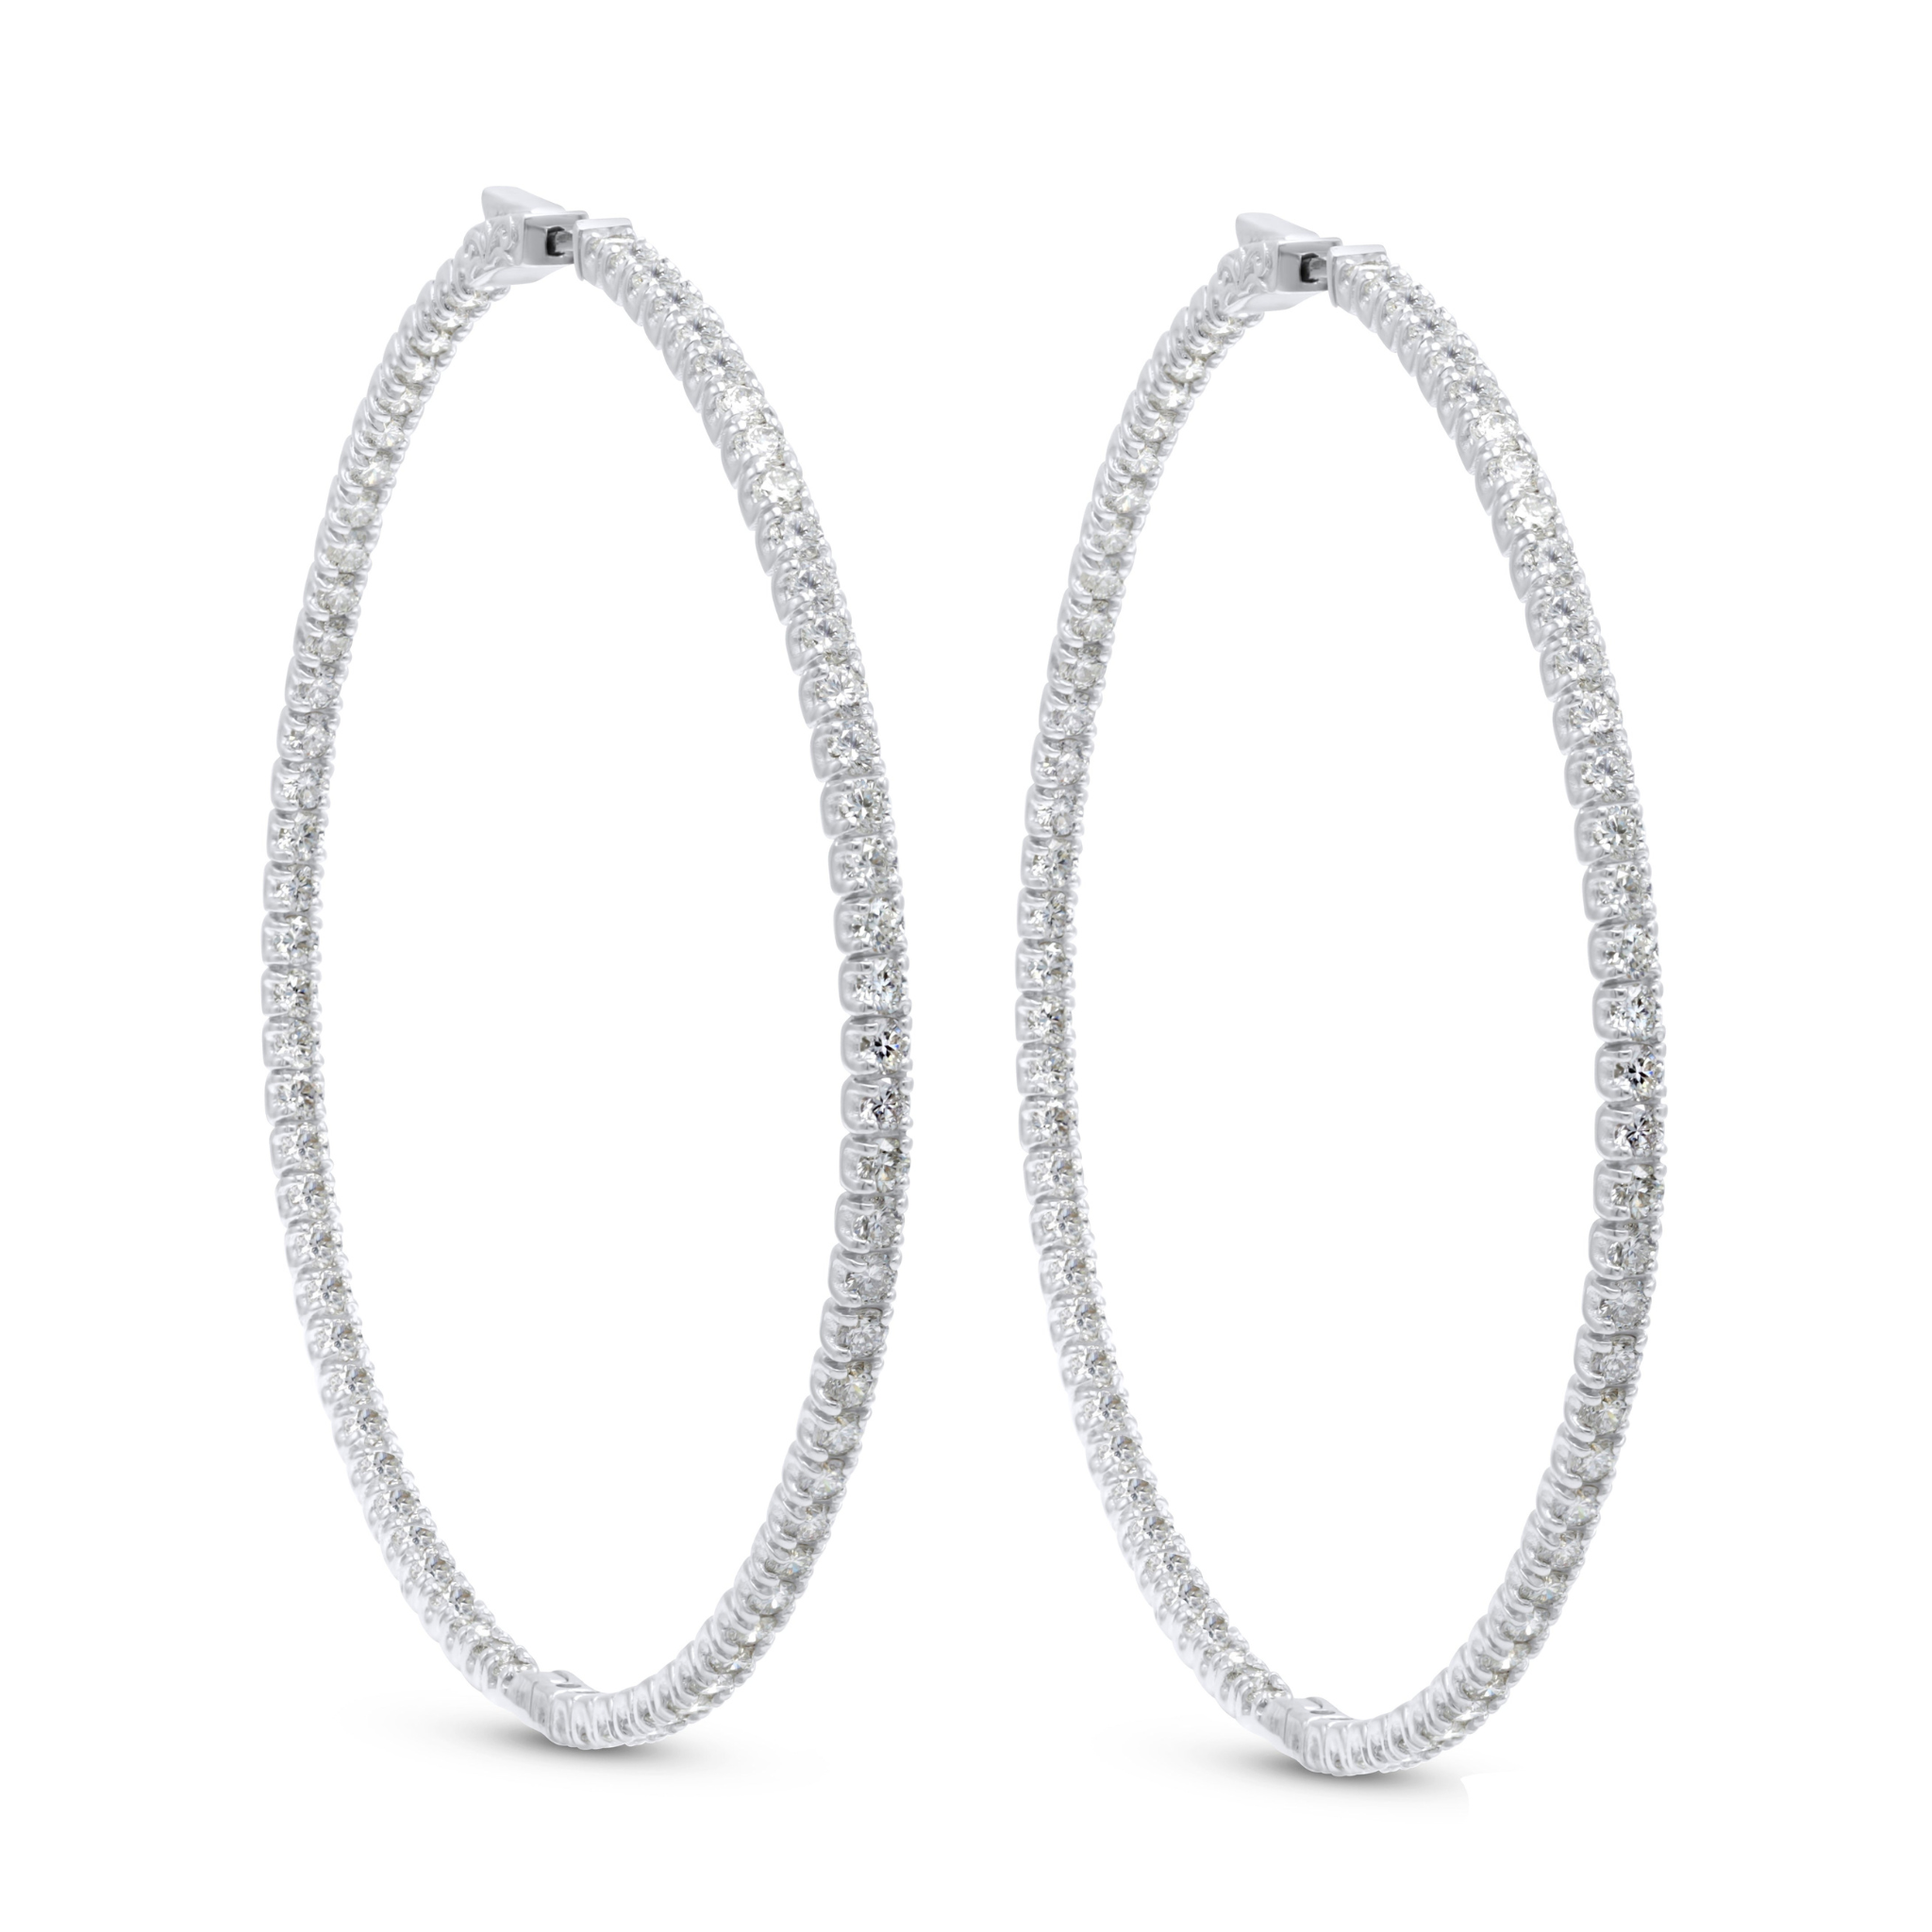 18 Kt White Gold 2.50" Hoop Earrings with 7.40 cts.jpg